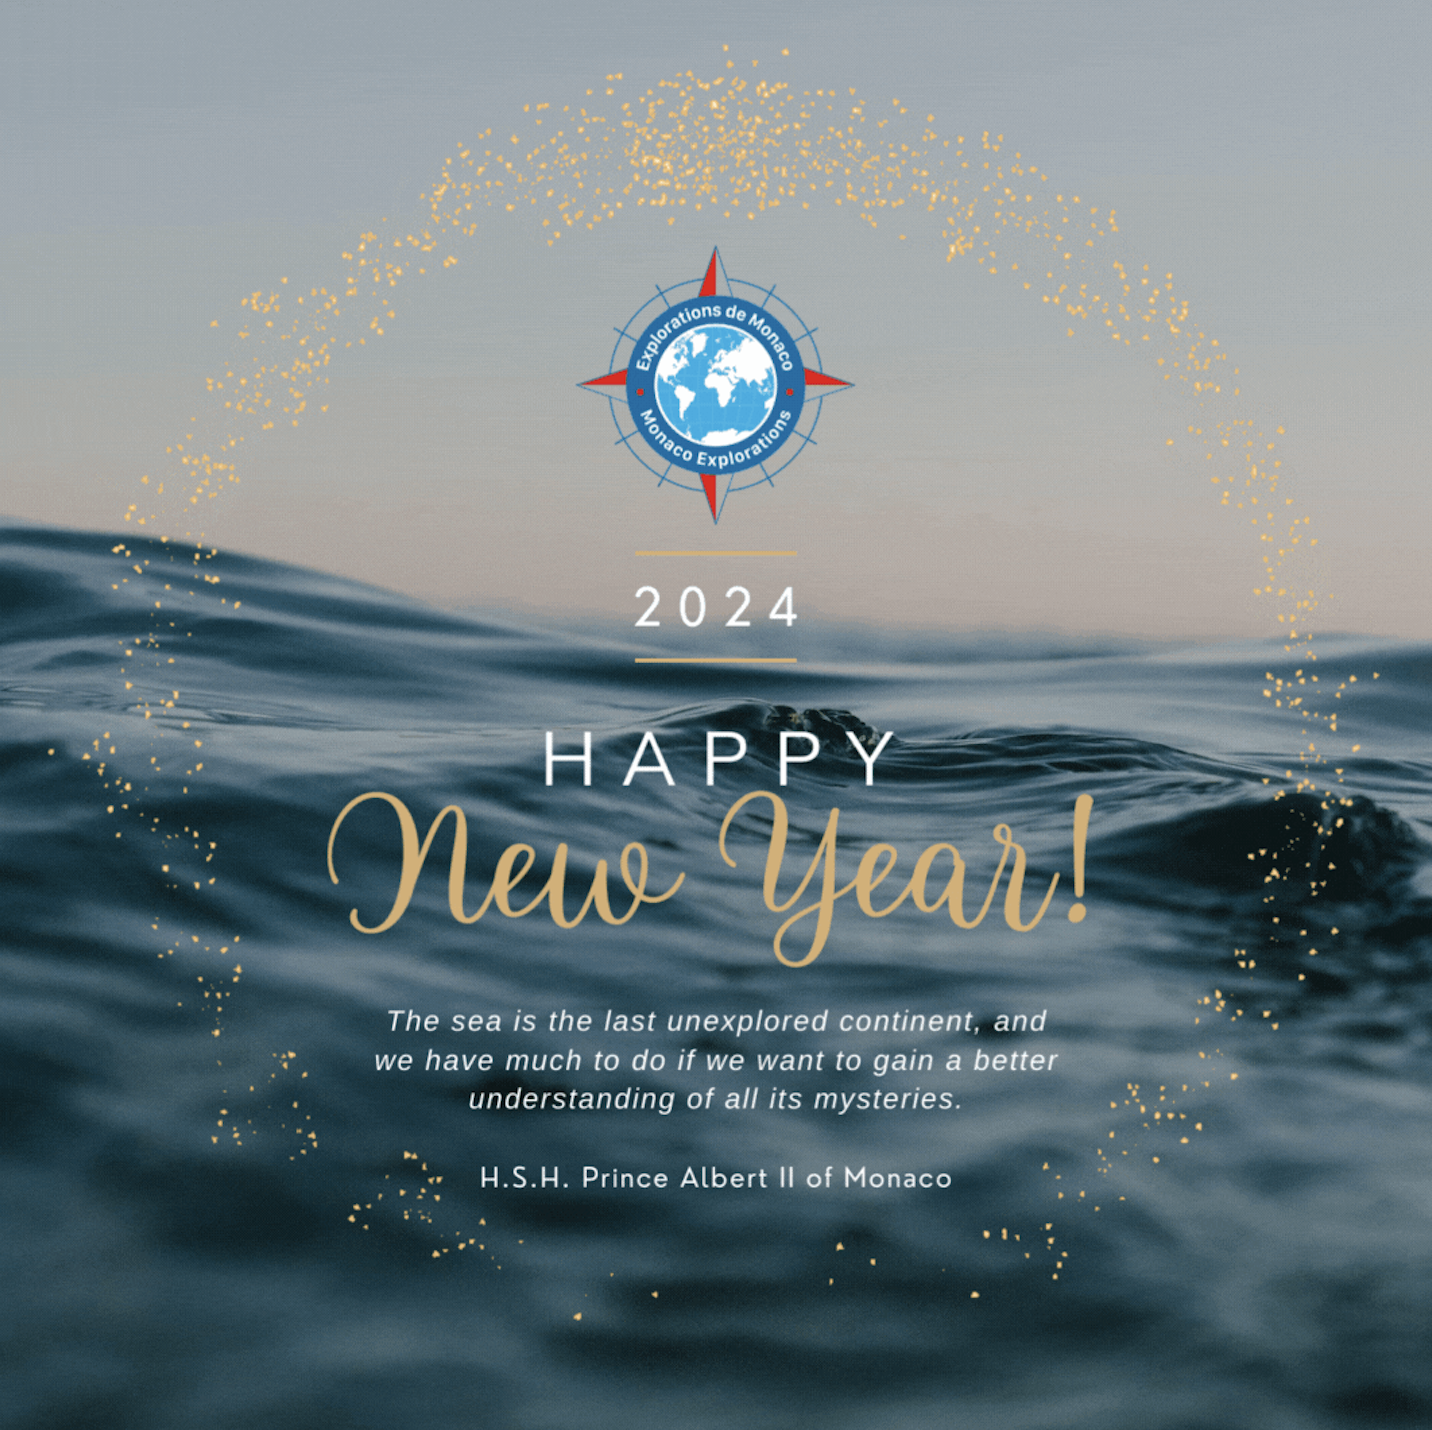 Monaco Explorations team wishes you a Happy New Year!